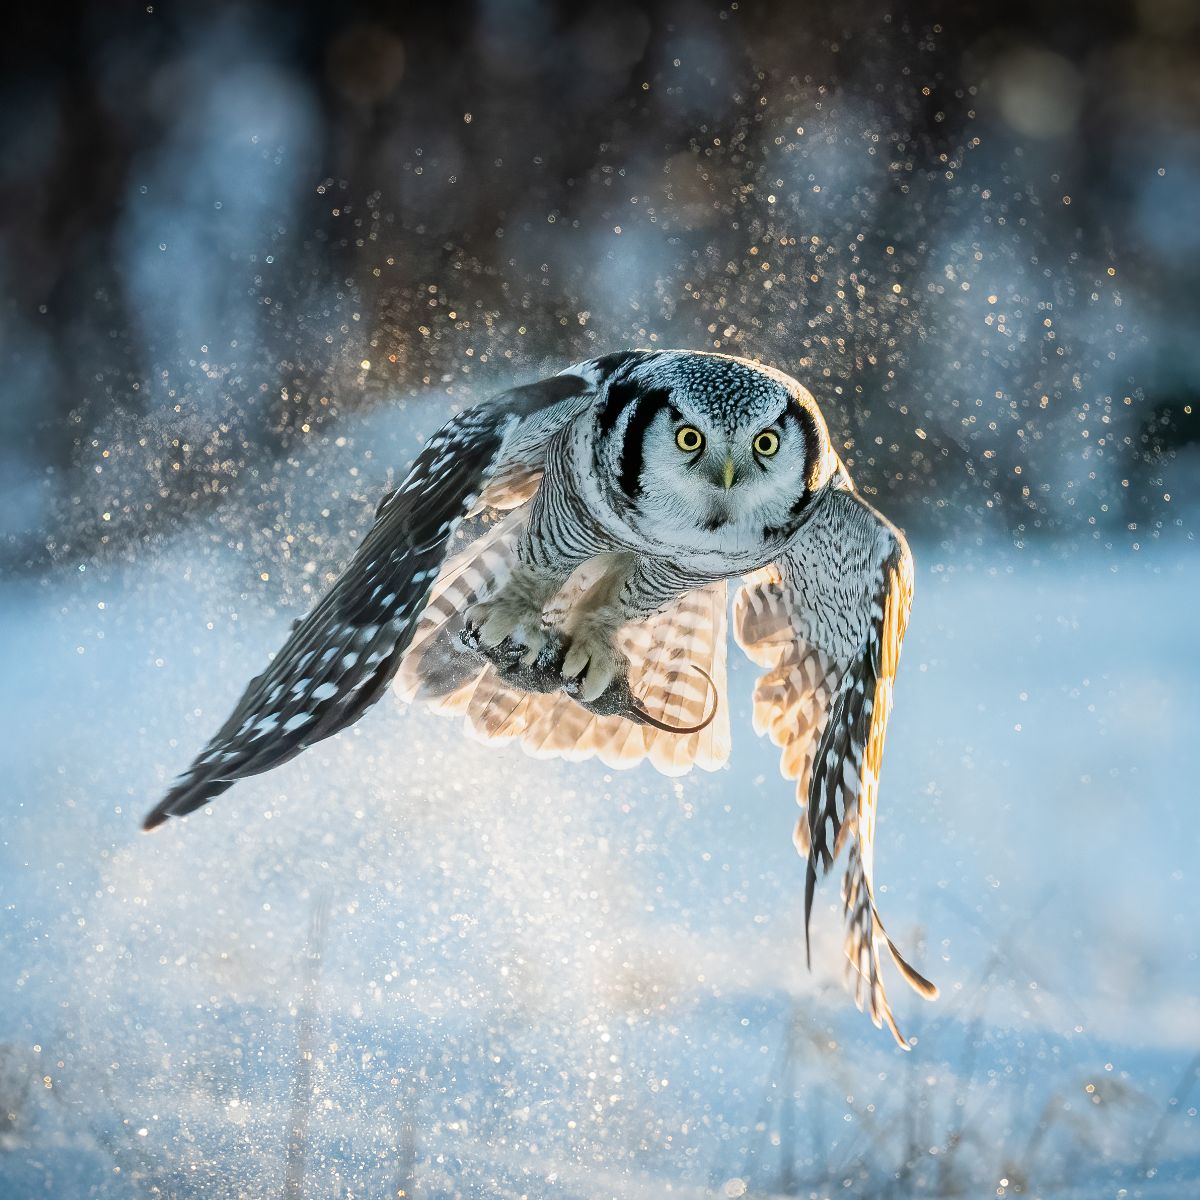 Spiritual Meaning Of Hitting An Owl With Your Car